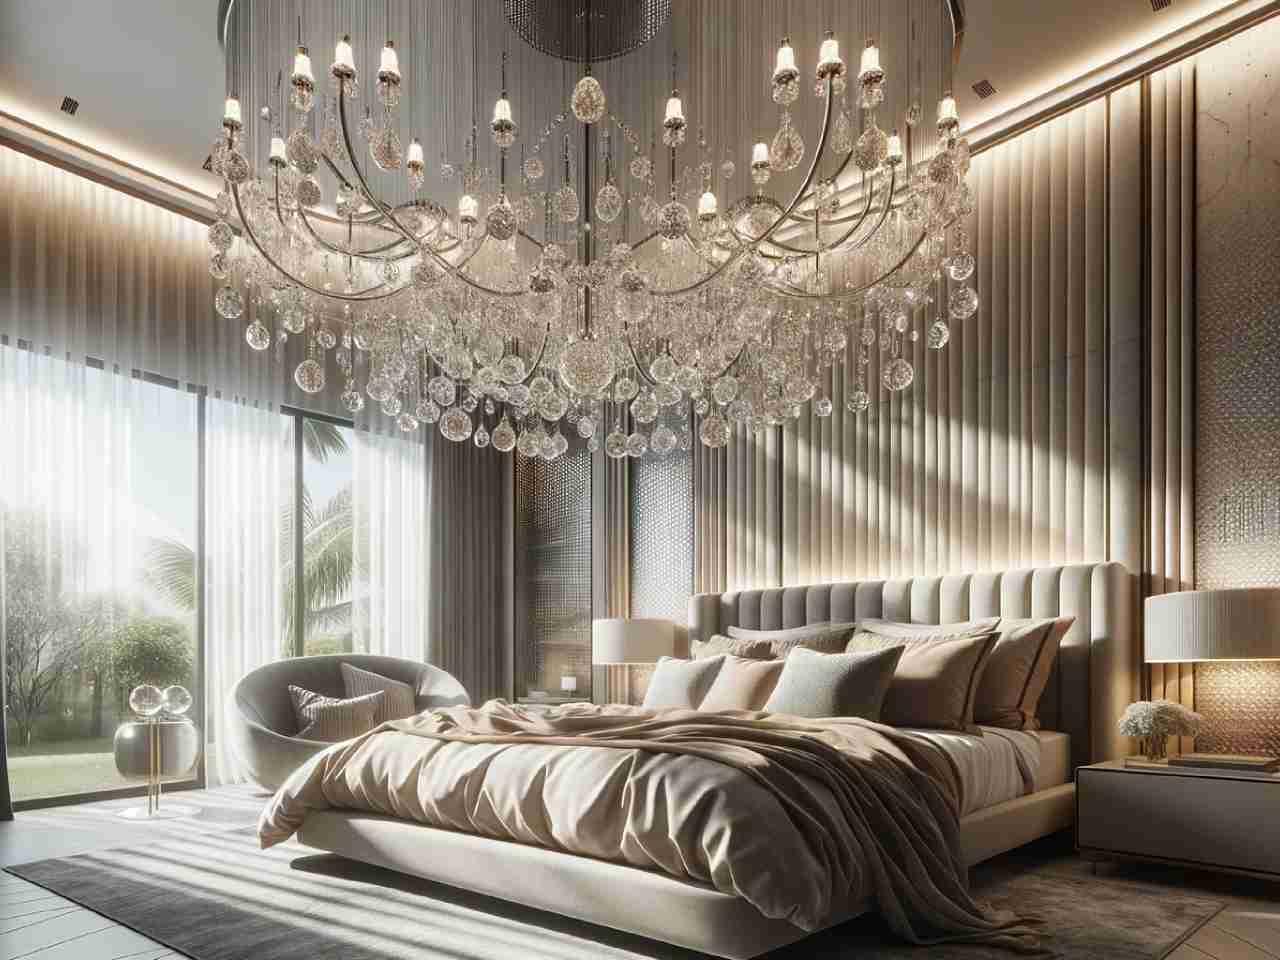 13 Advanced Bedroom Chandelier Ideas [2023] – The Ultimate Checklist!